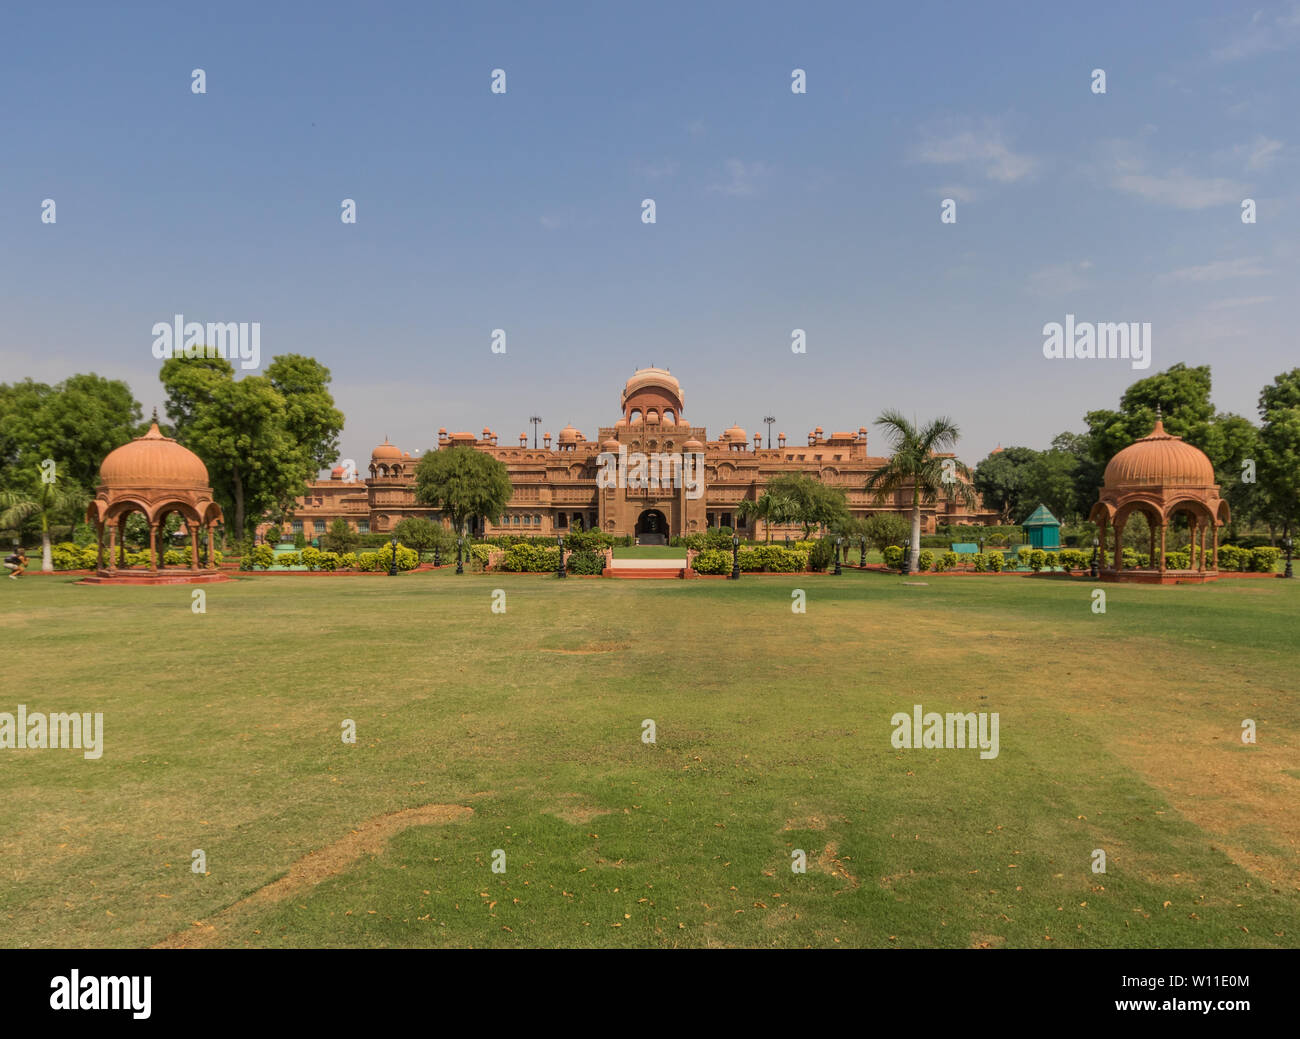 Bikaner, India - Rajasthan is famous for its fortresses and the desertic environment. Here in particular the city of Bikaner Stock Photo